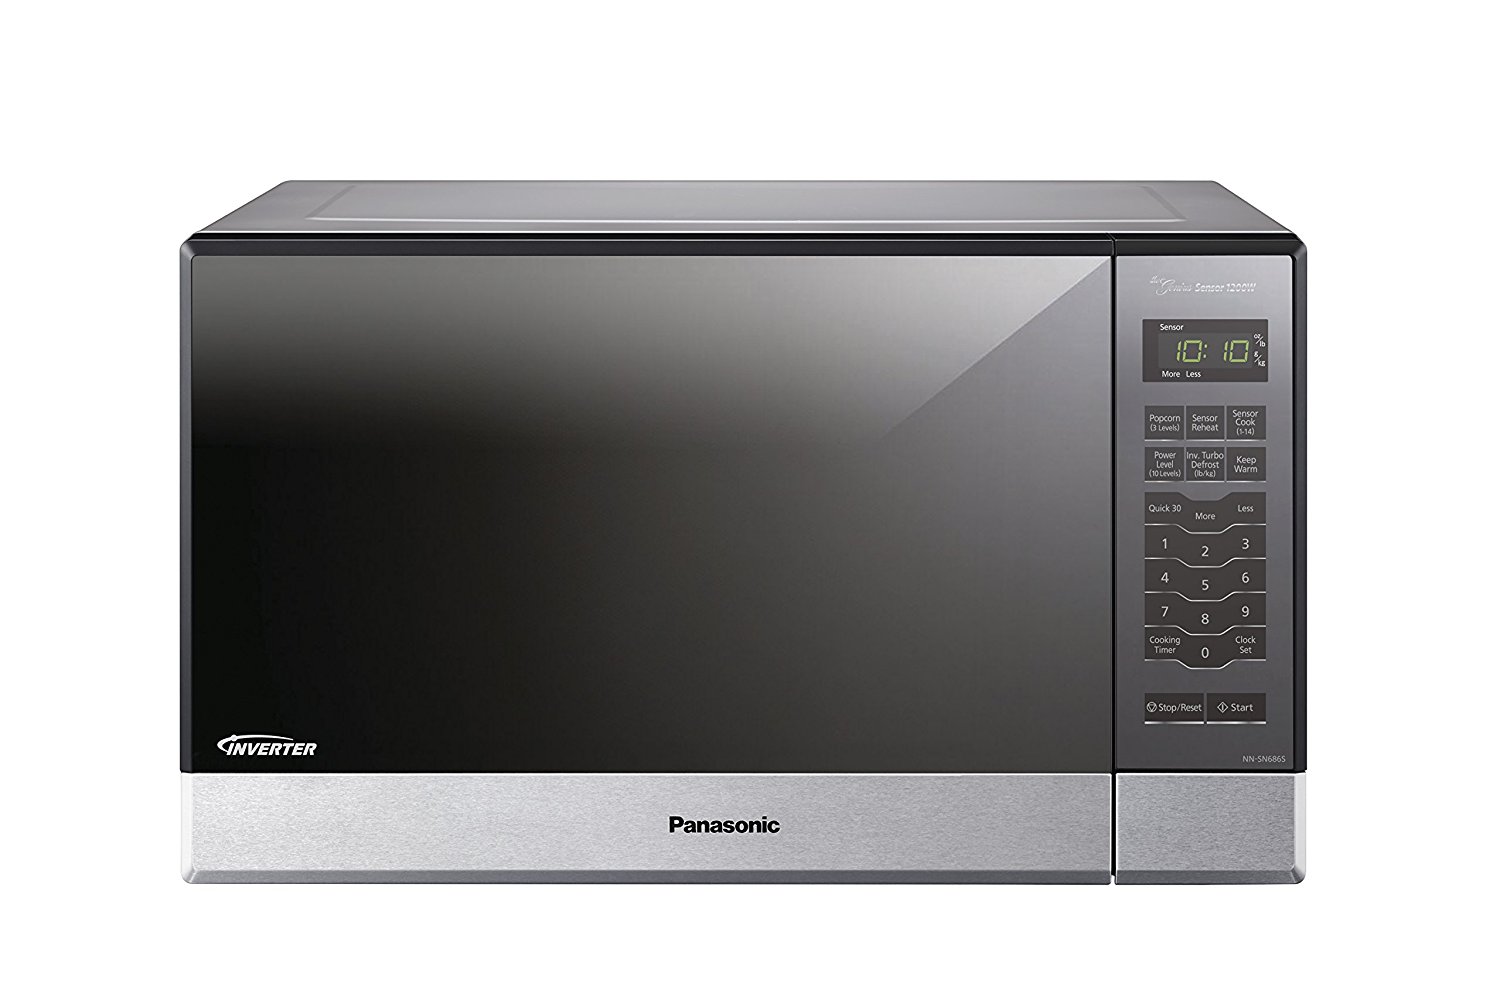 Panasonic NN-SN686S Countertop/Built-In Microwave with Inverter Technology, 1.2 cu. ft. , Stainless